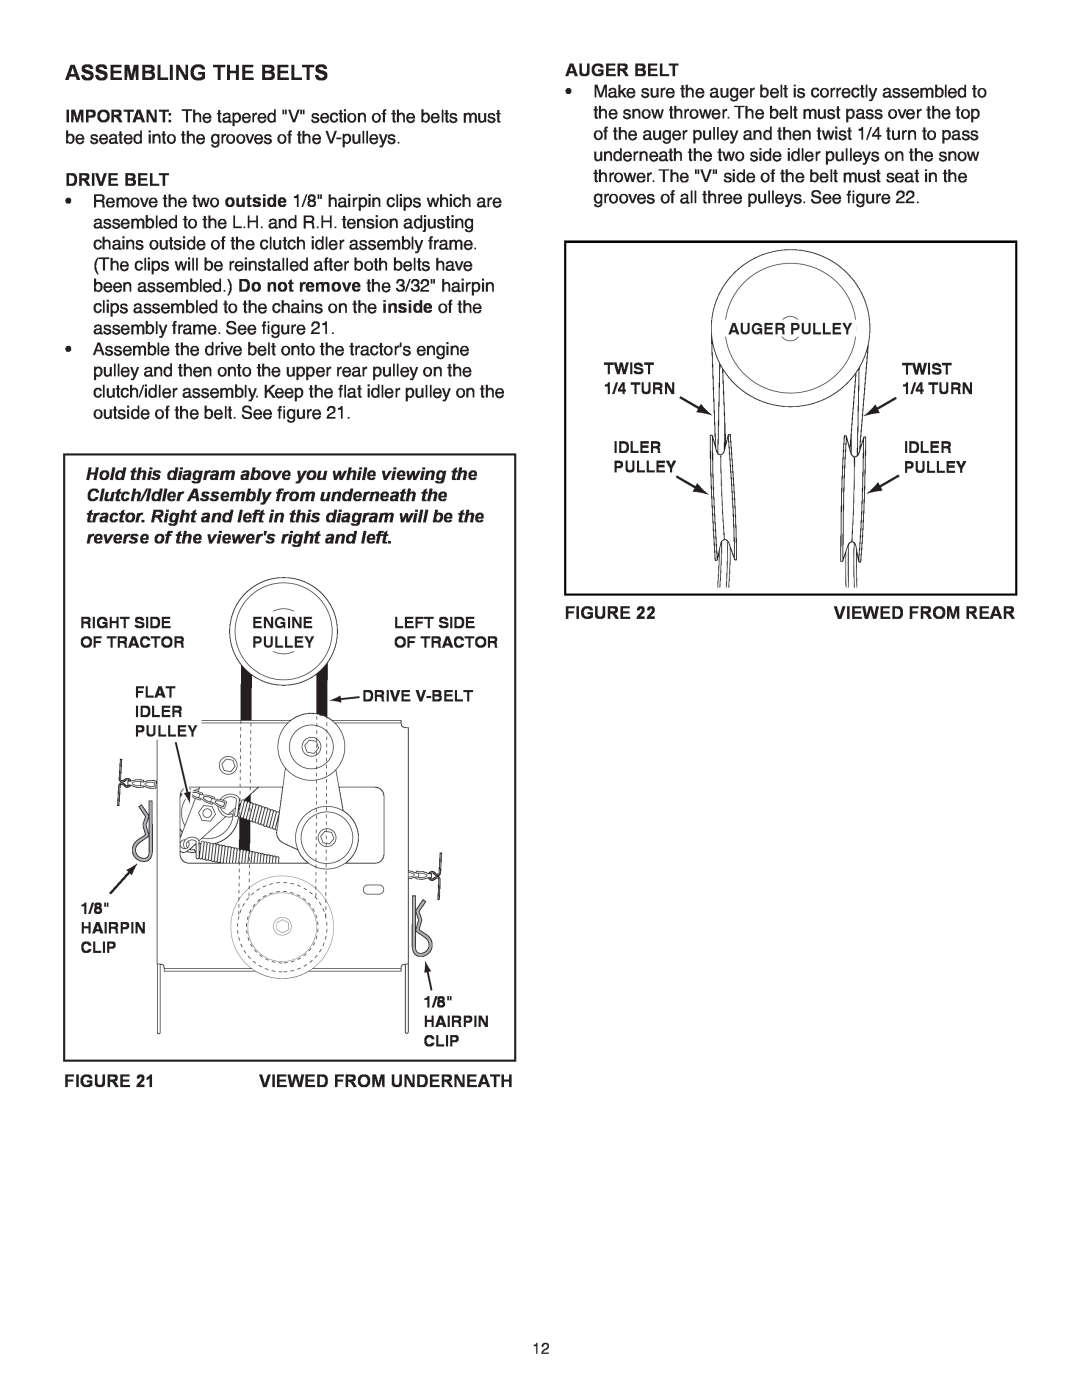 Sears 486.248463 owner manual Assembling The Belts, Drive Belt, Auger Belt, Viewed From Rear, Viewed From Underneath 